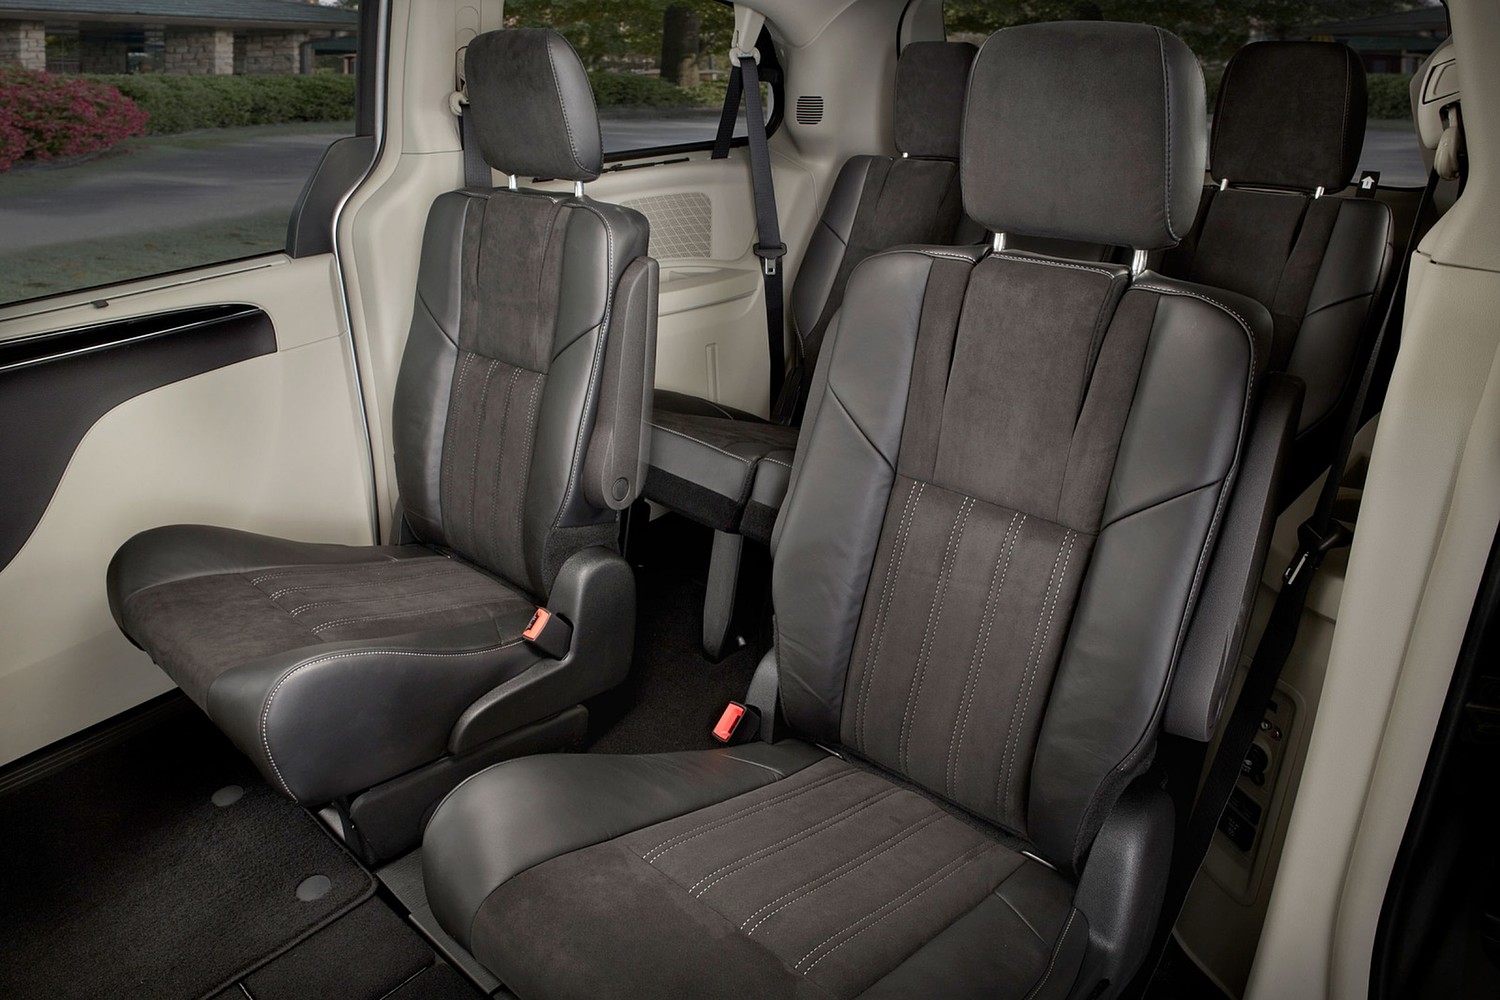 2016 Chrysler Town and Country Anniversary Edition Passenger Minivan Rear Interior